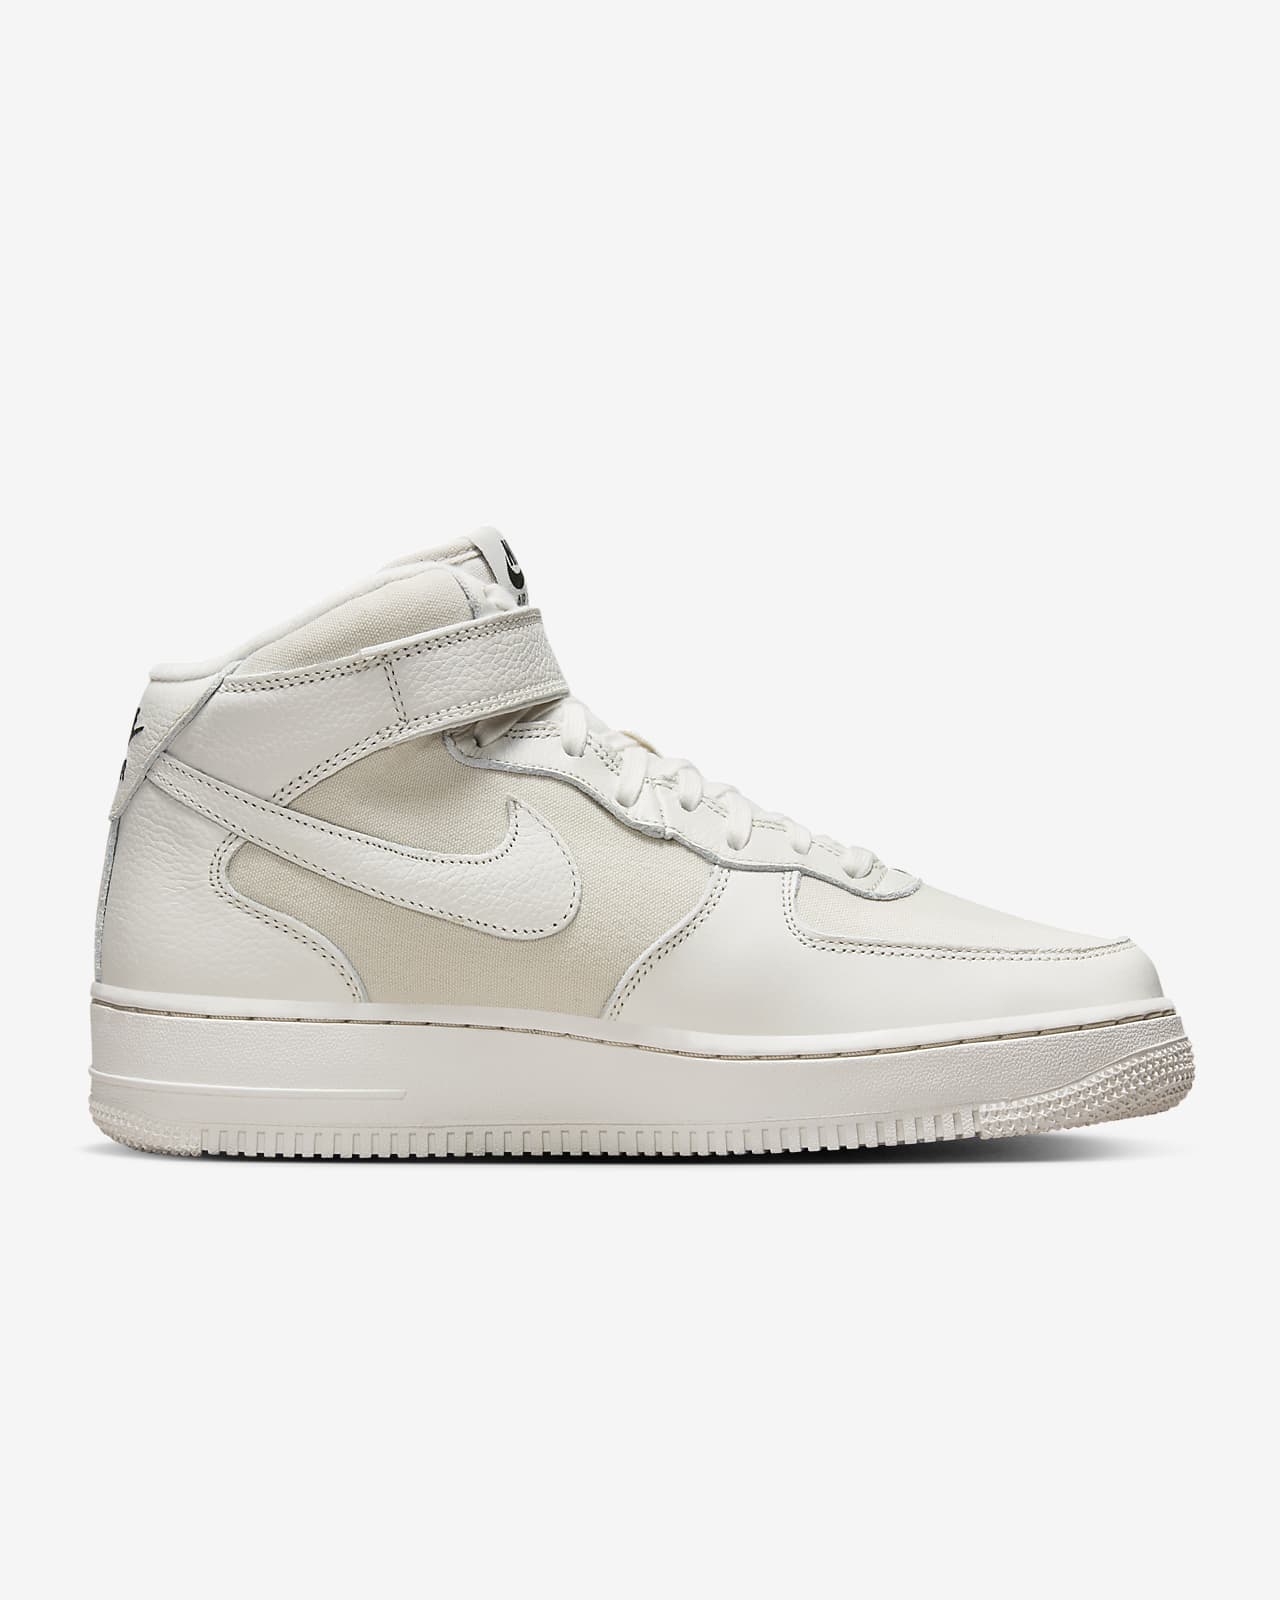 Nike Air Force 1 High '07 LX Men's Shoes